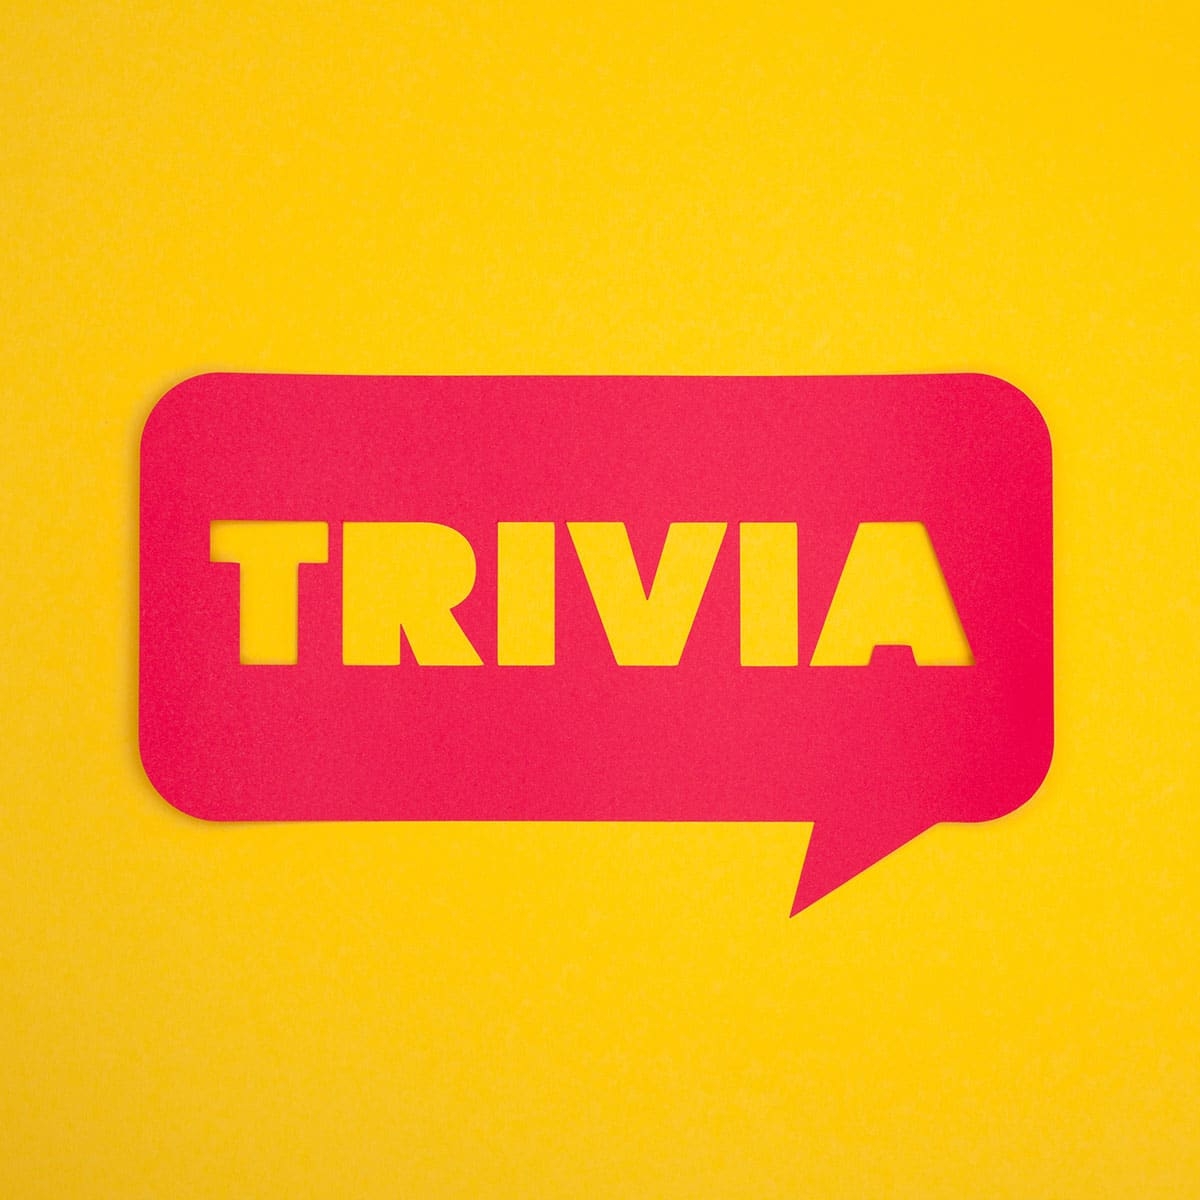 National Trivia Day 2019